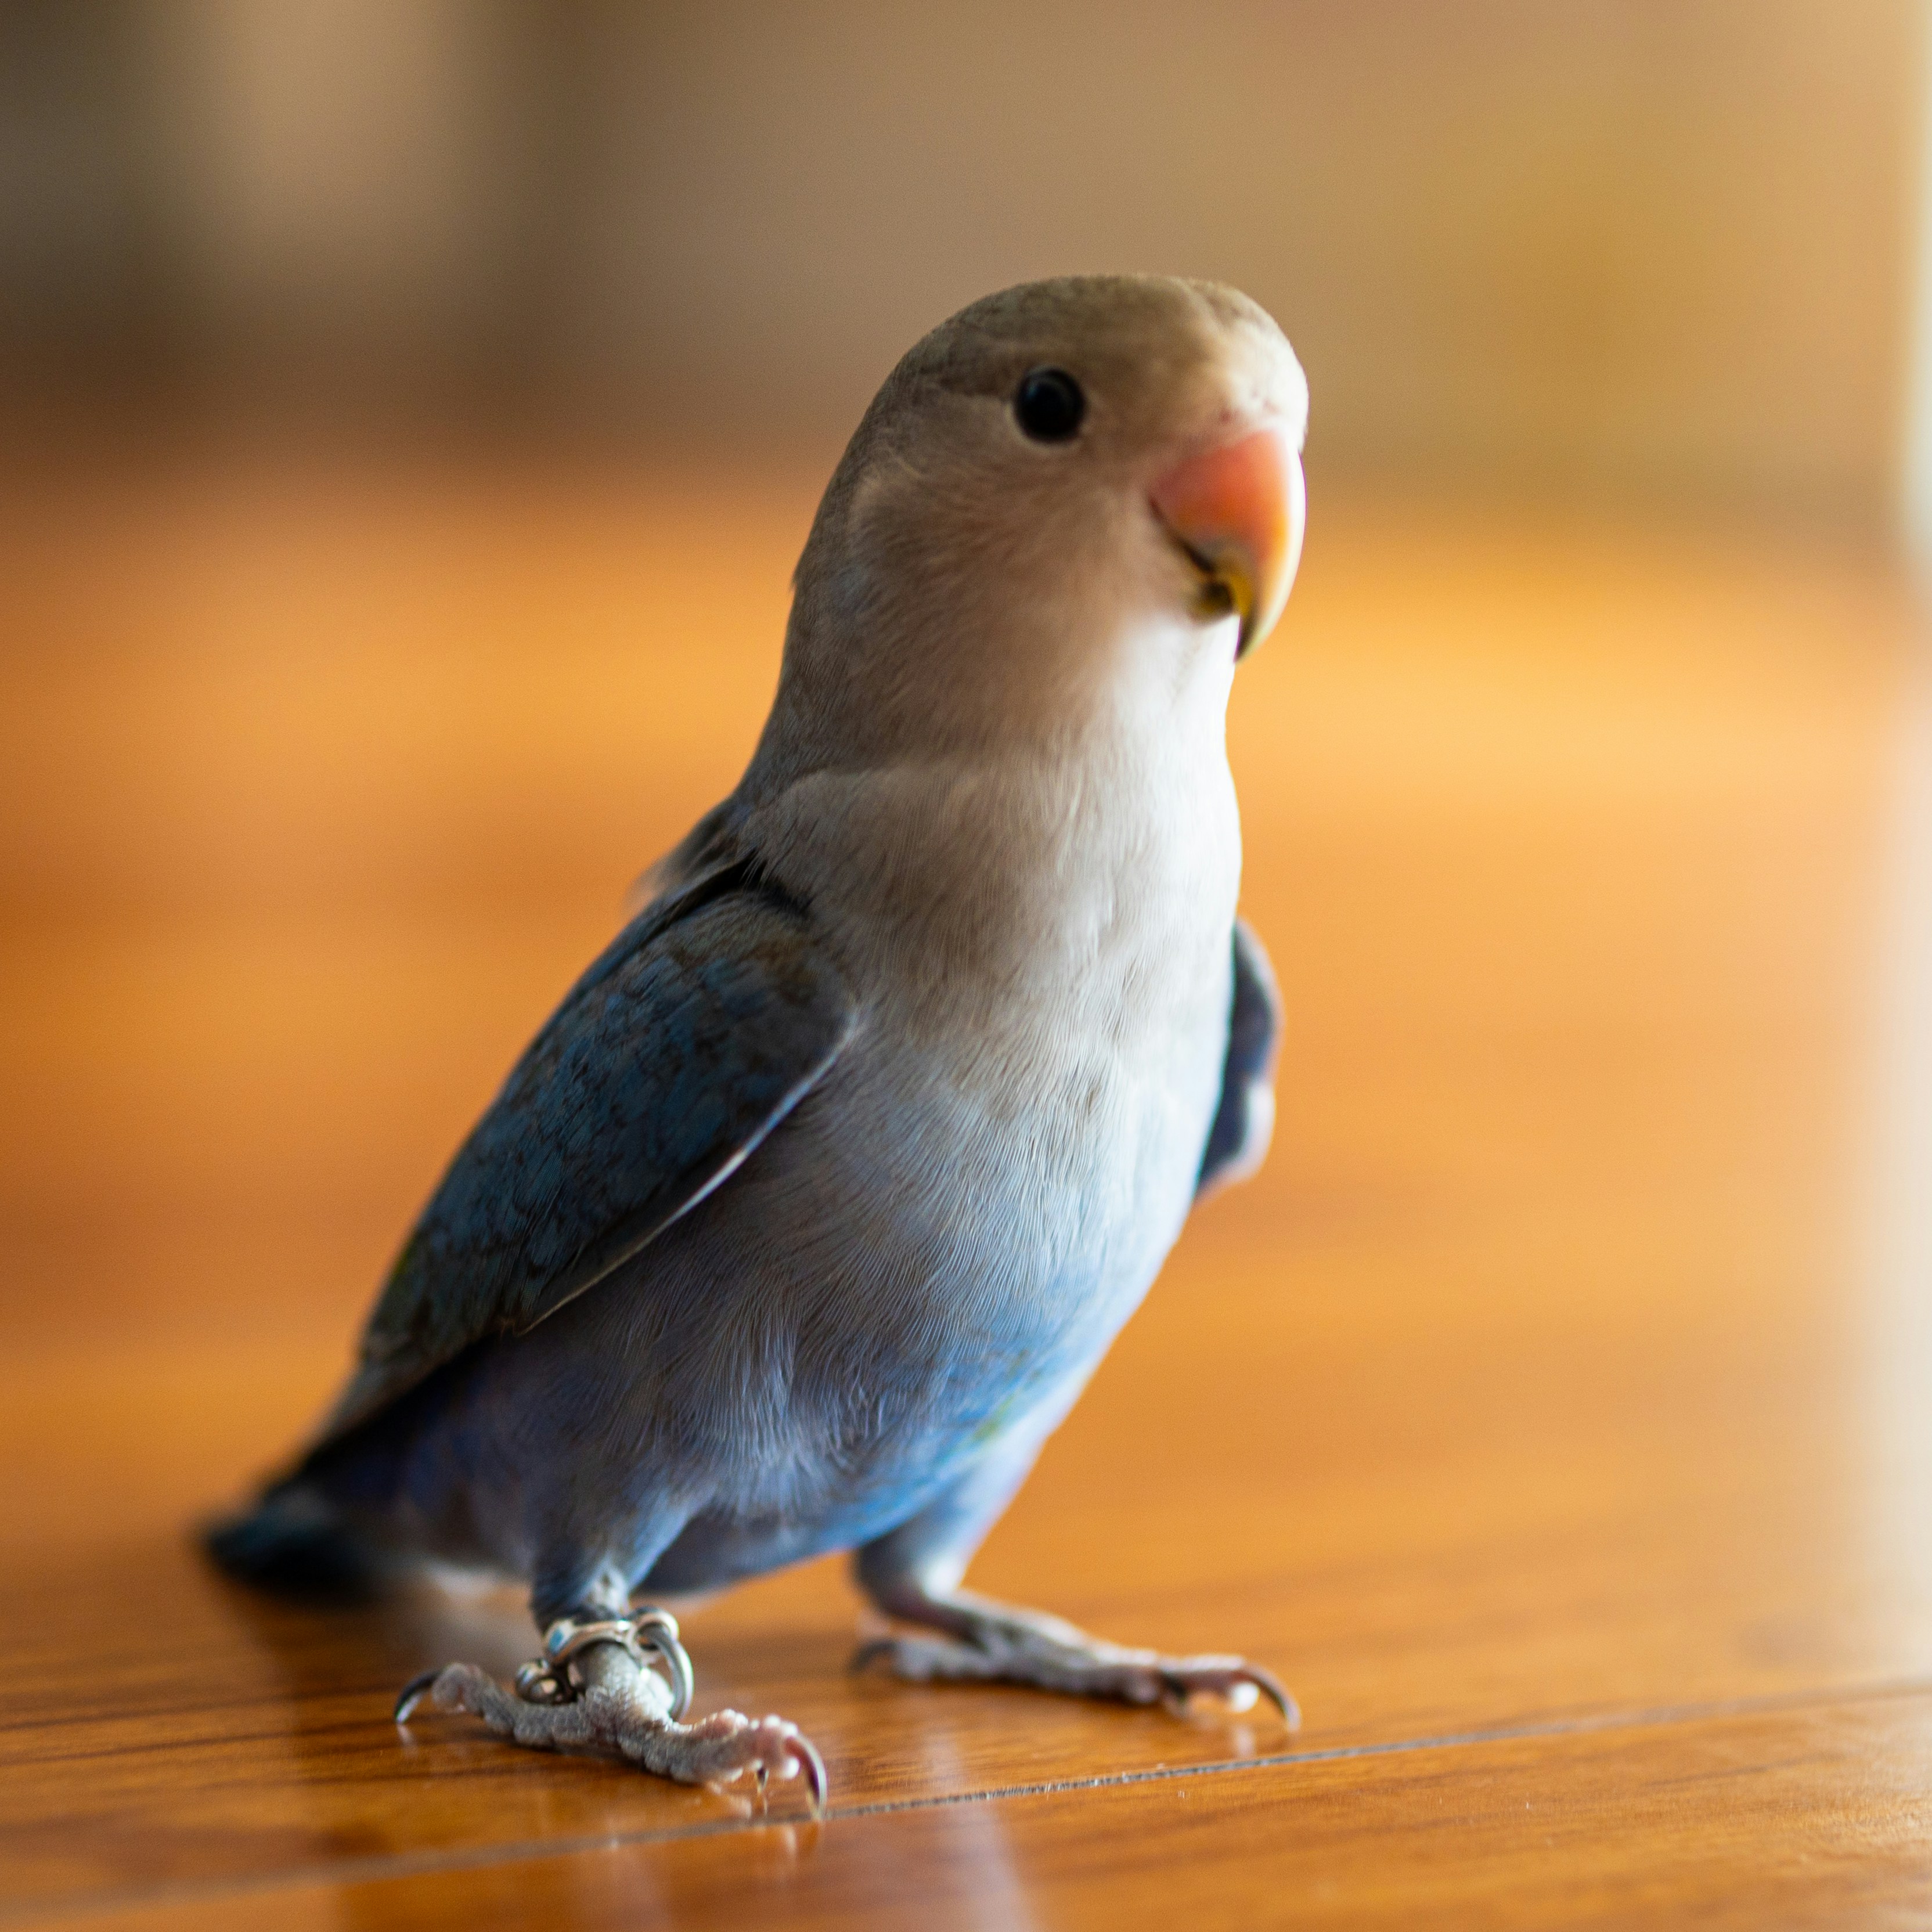 a blue and white bird sitting on a wooden floor